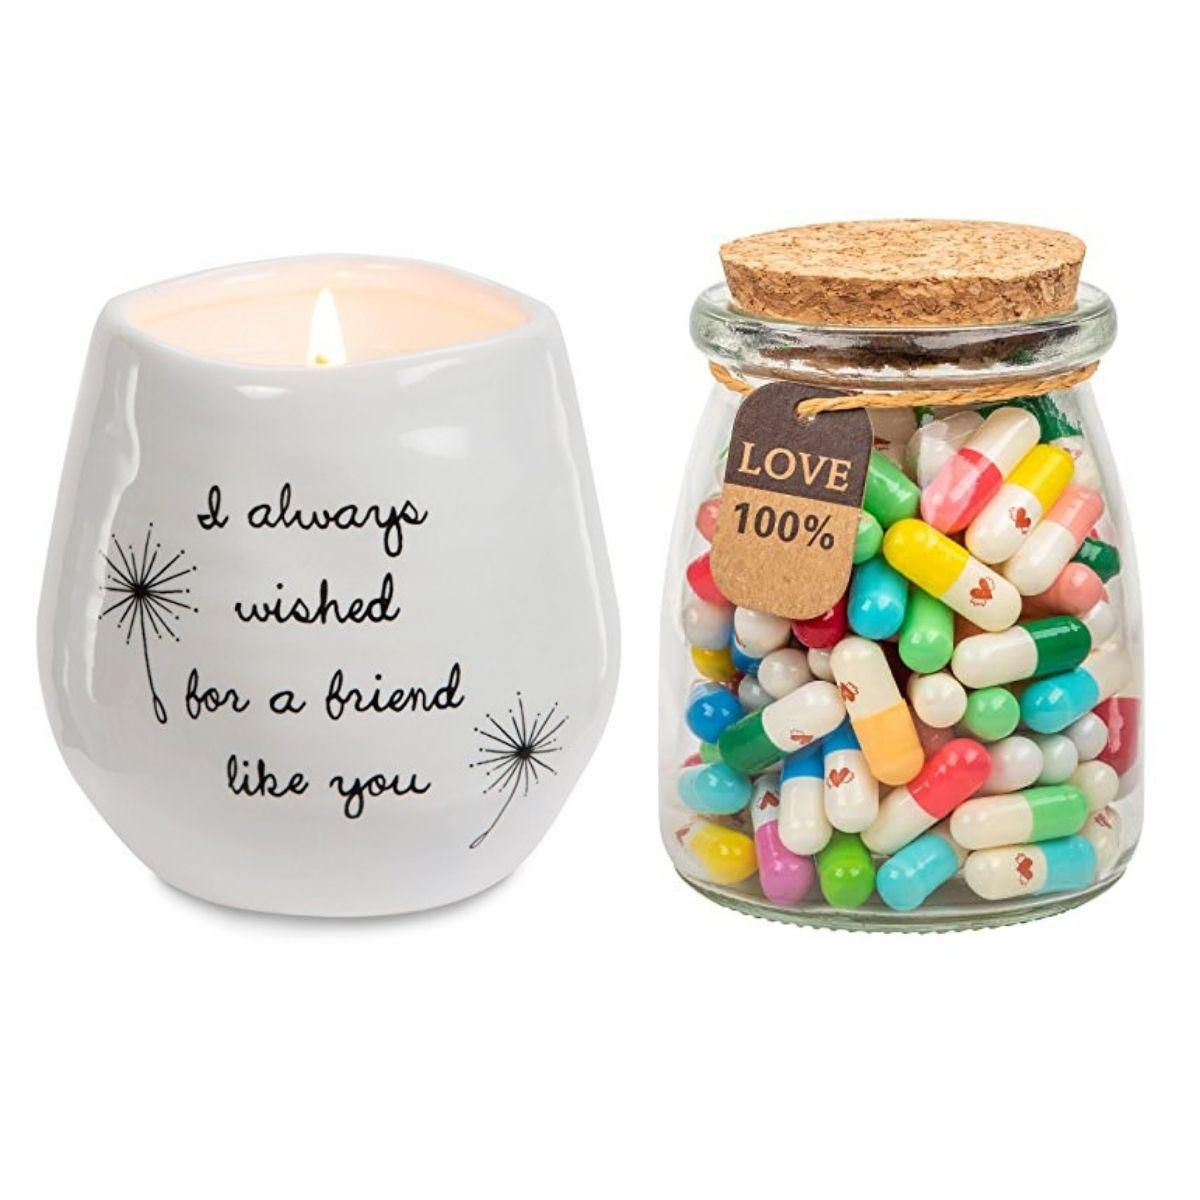 40 Thoughtful Gifts For Friends This Holiday Season